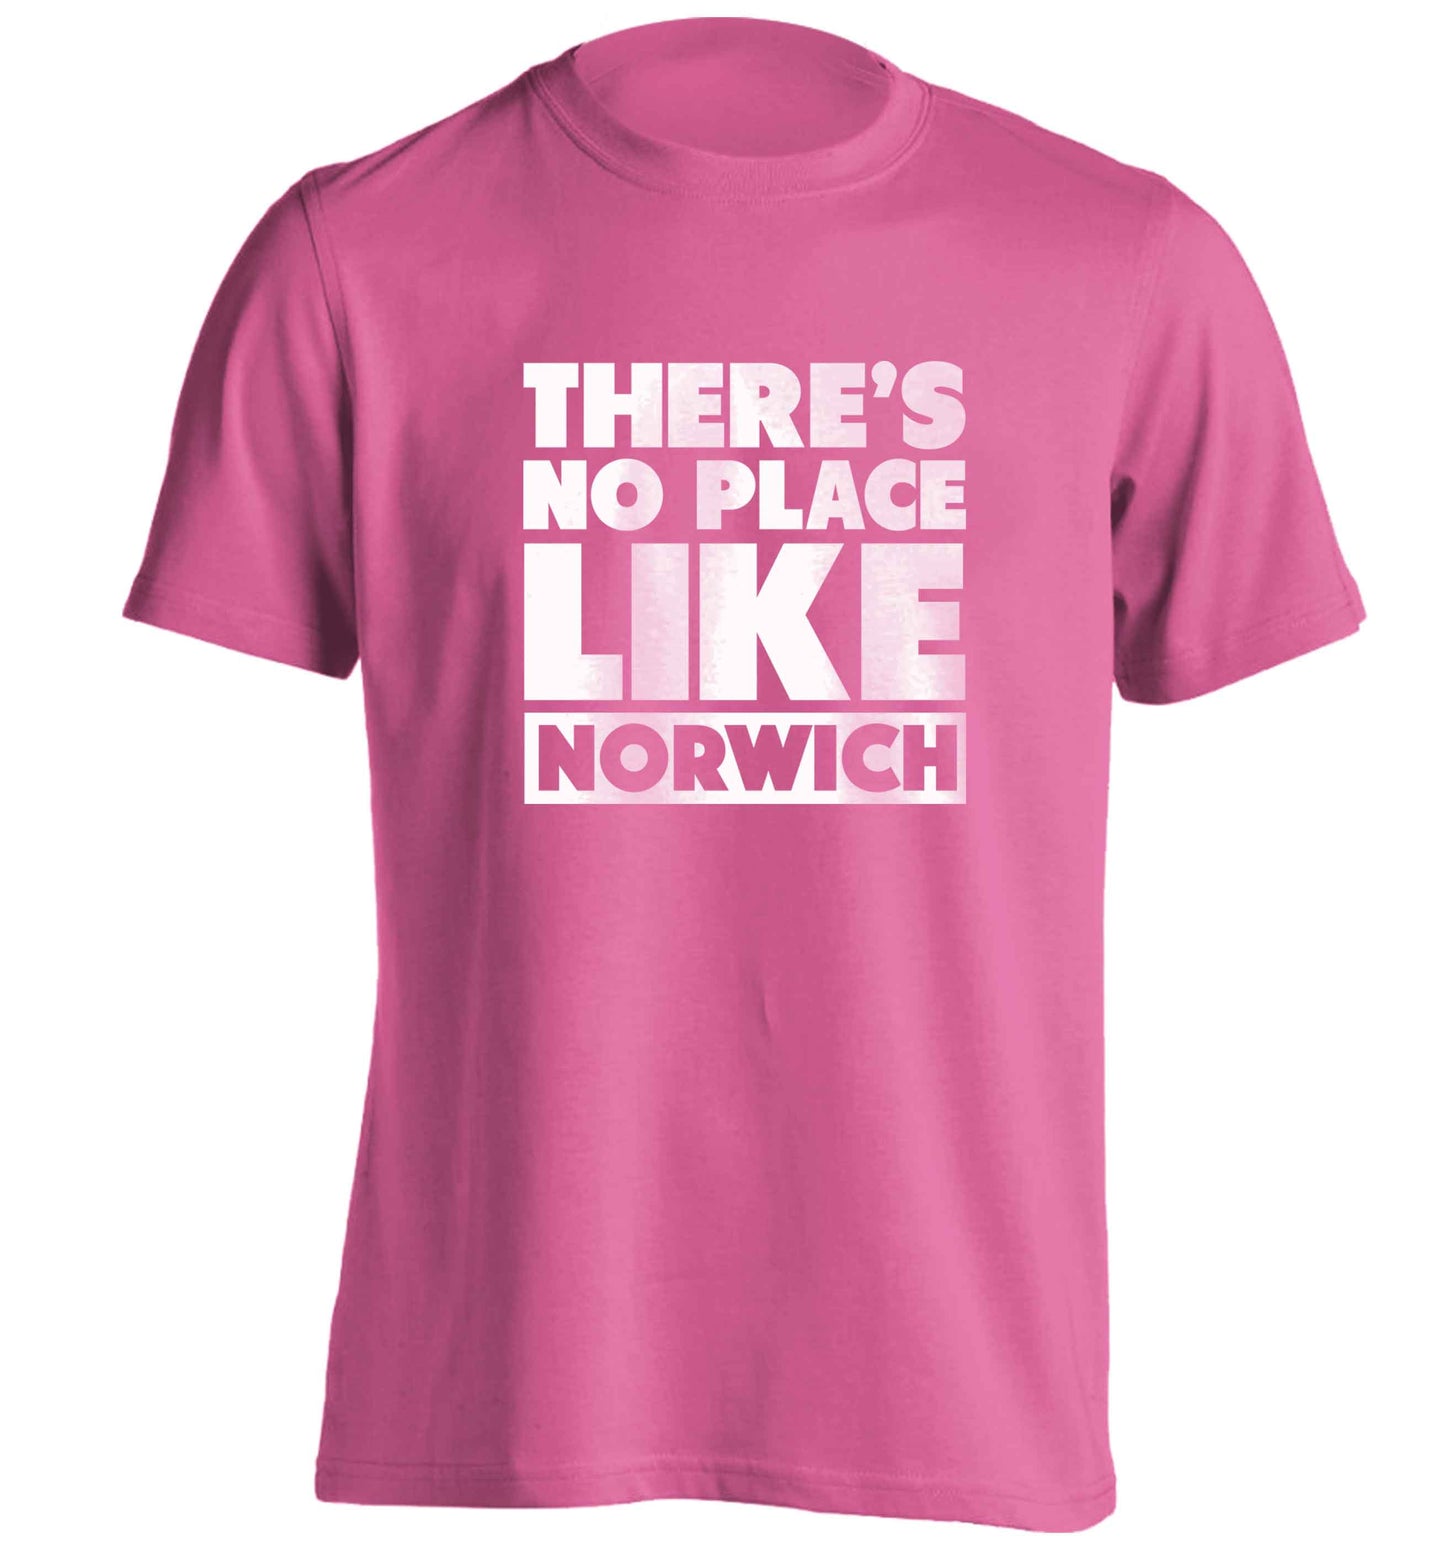 There's no place like Norwich adults unisex pink Tshirt 2XL